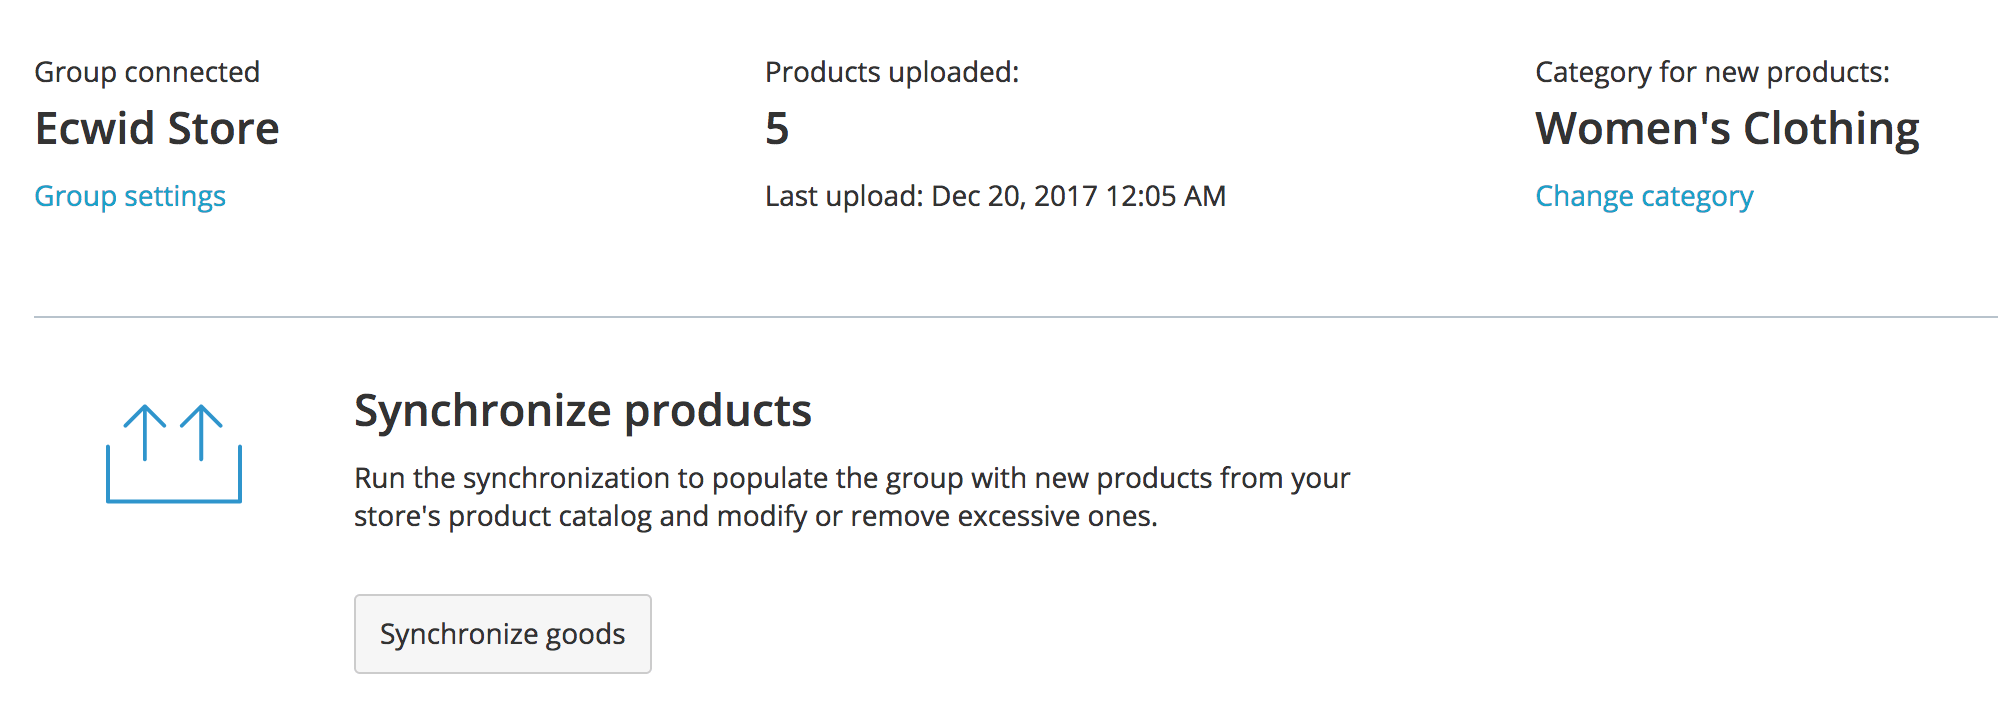 Products_uploaded.png